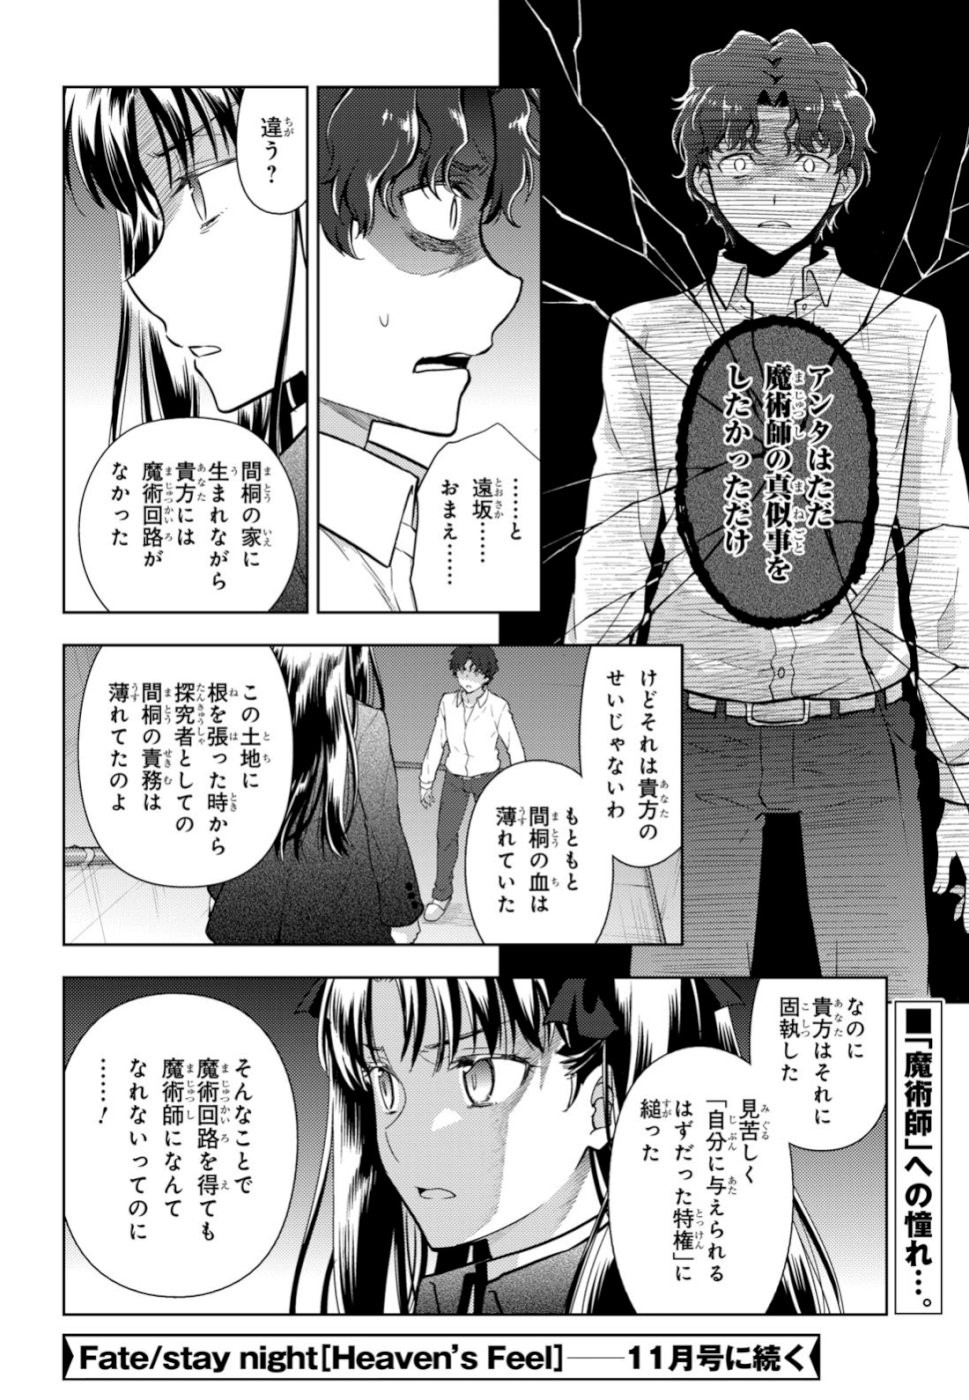 Fate/Stay night Heaven's Feel - Chapter 51 - Page 10